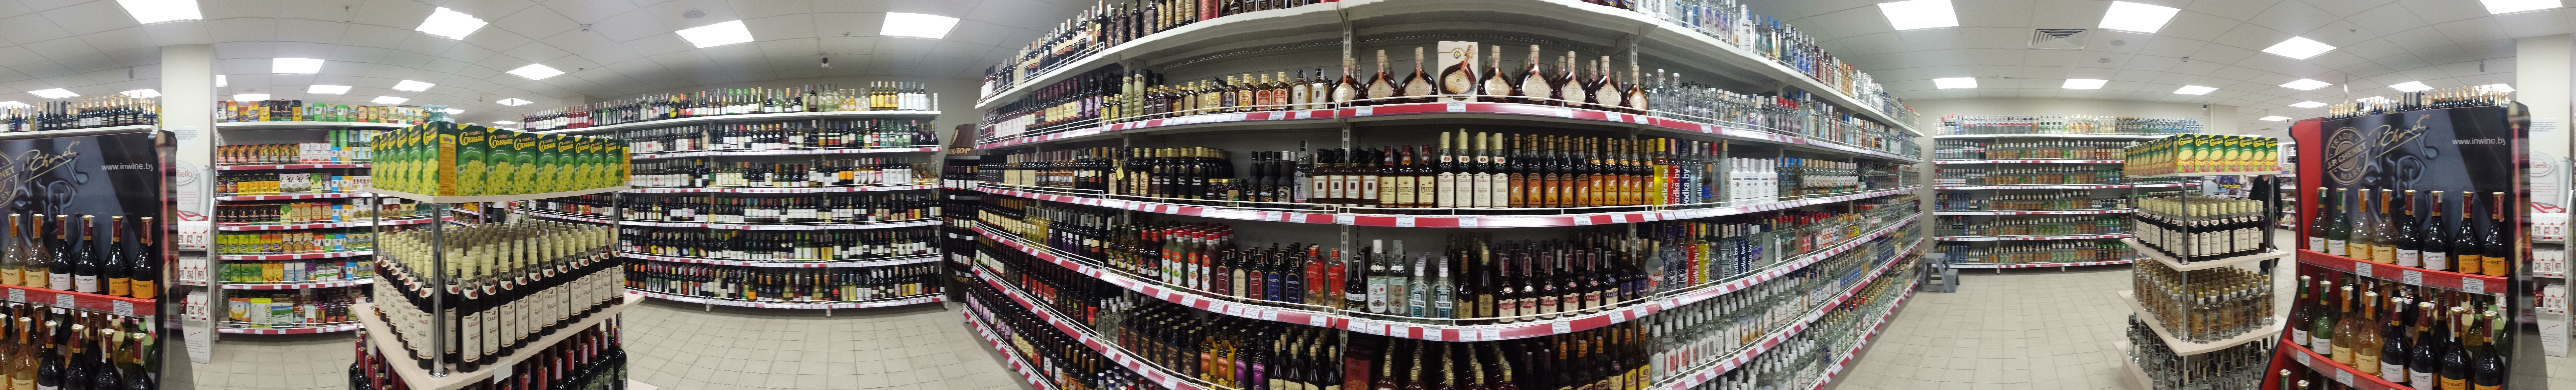 Panorama time in the supermarket!